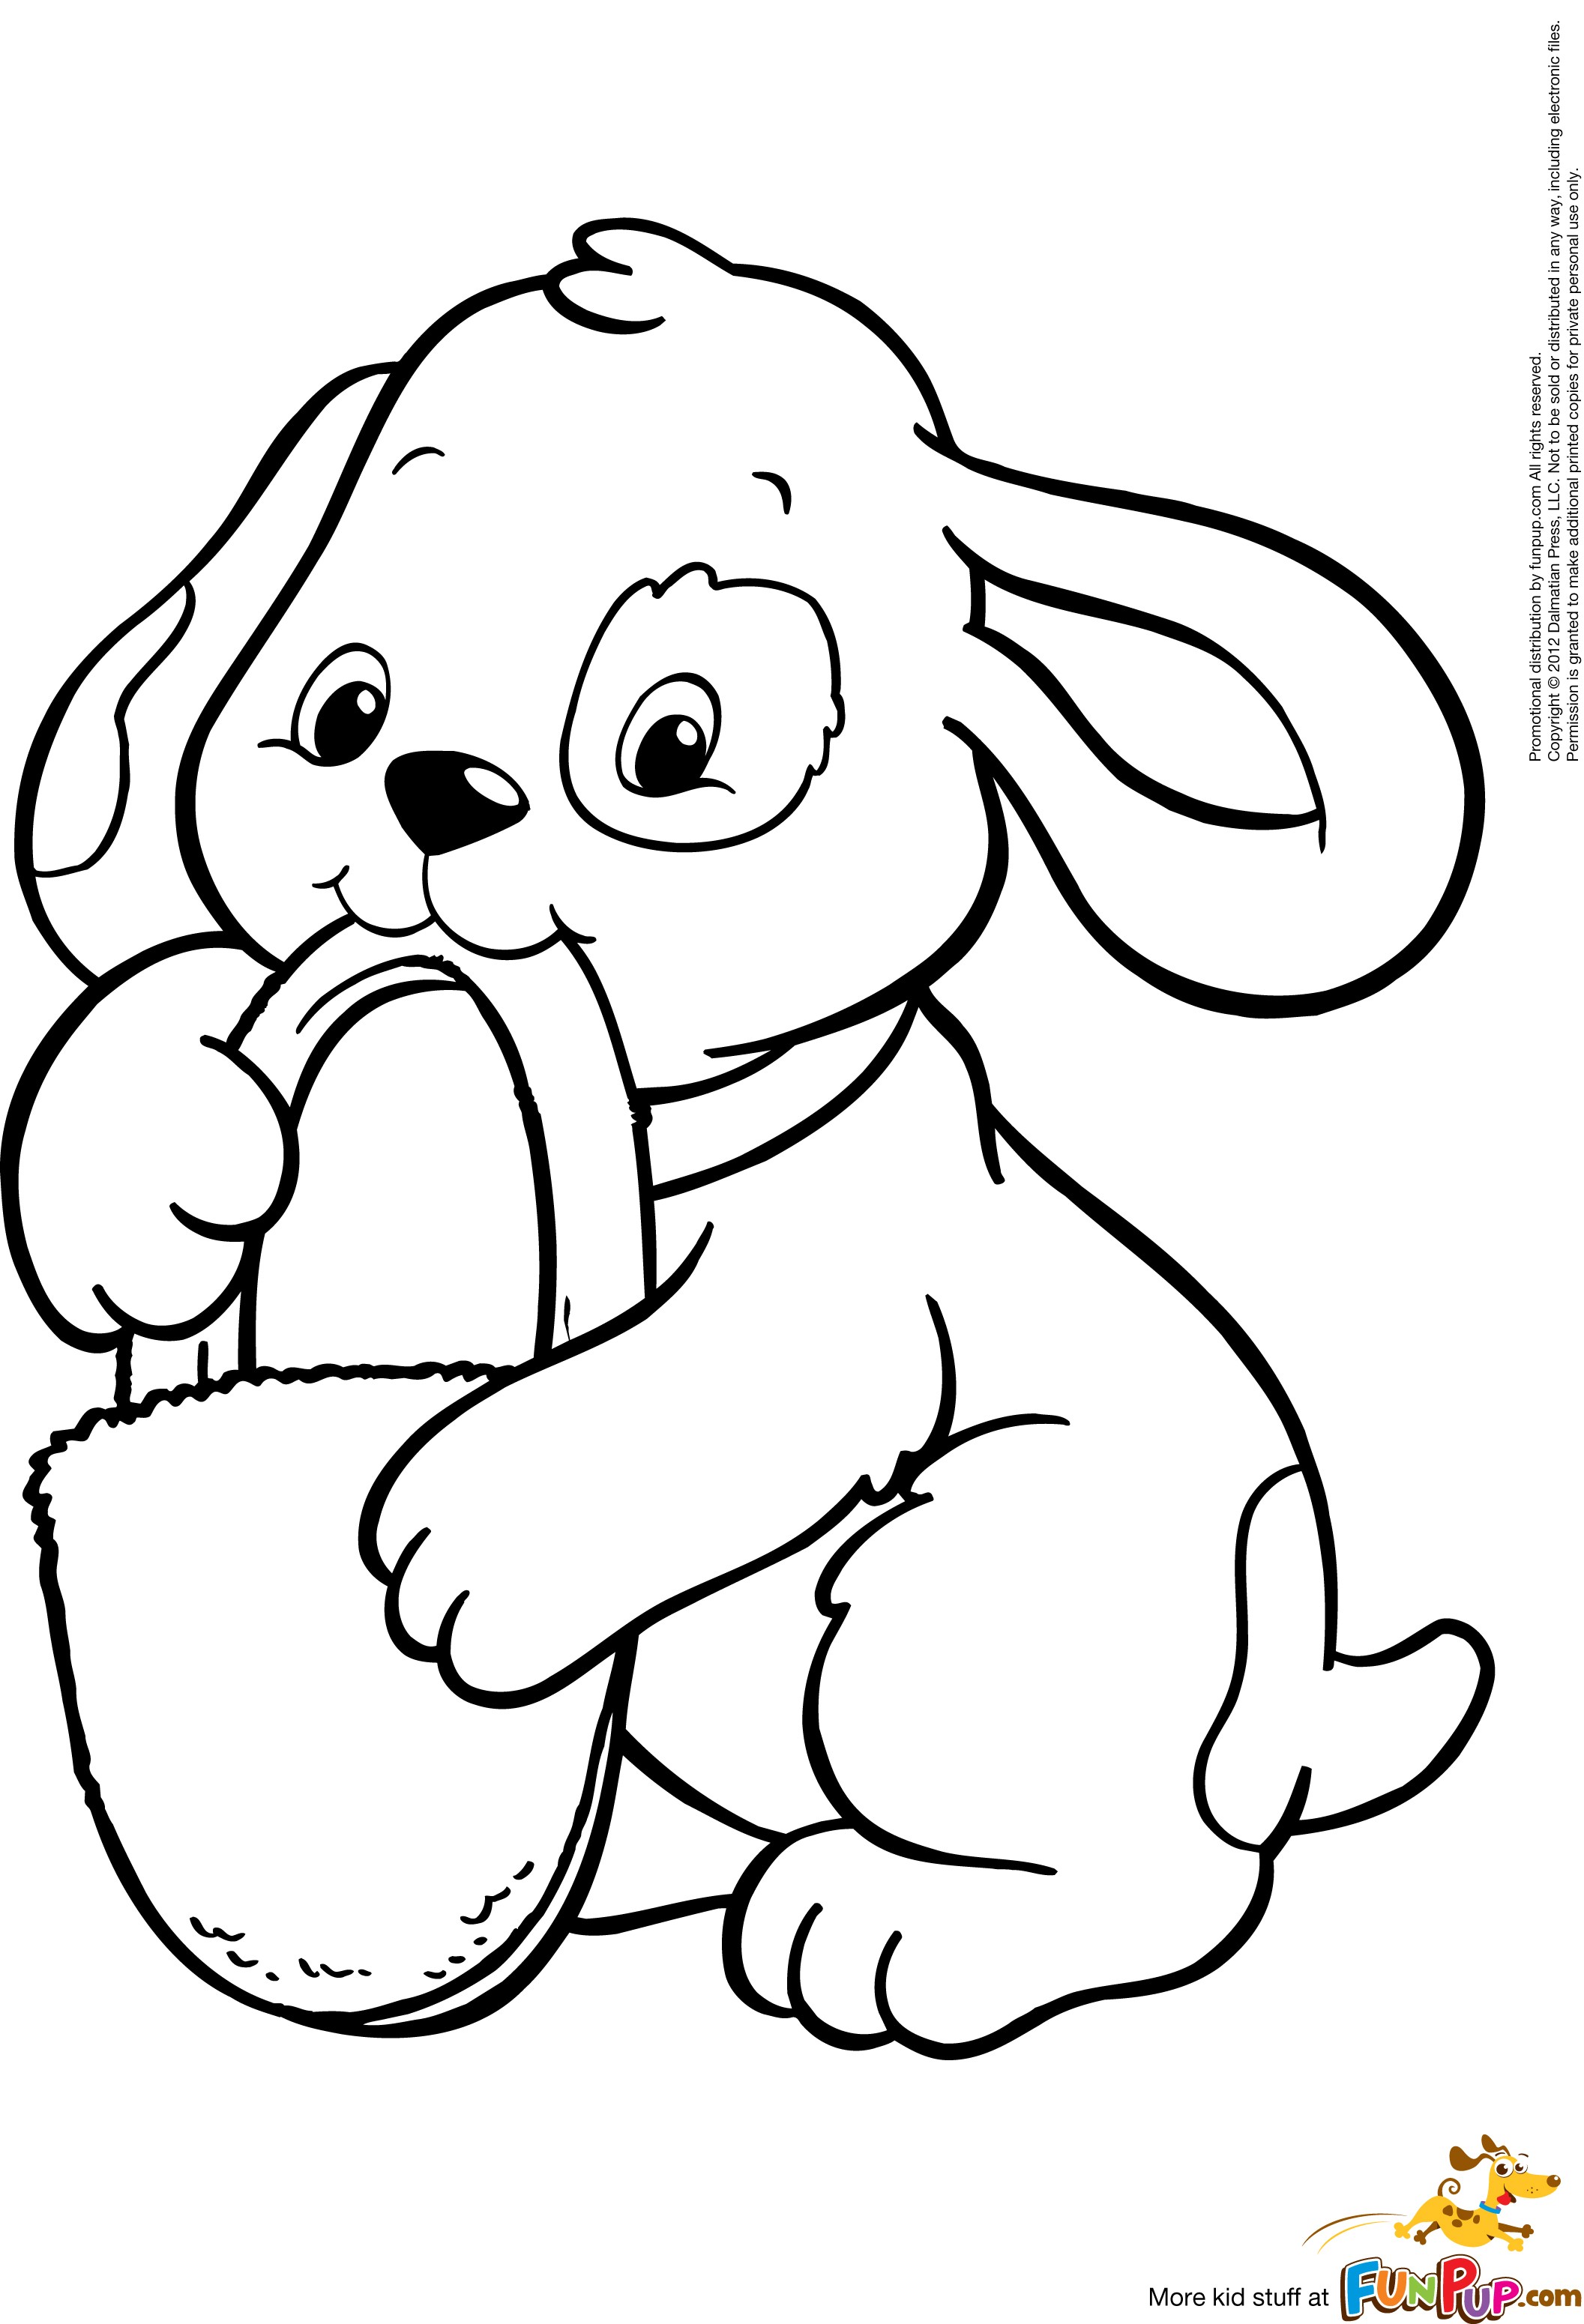 Puppy Coloring Pages - Printable Free Coloring Pages